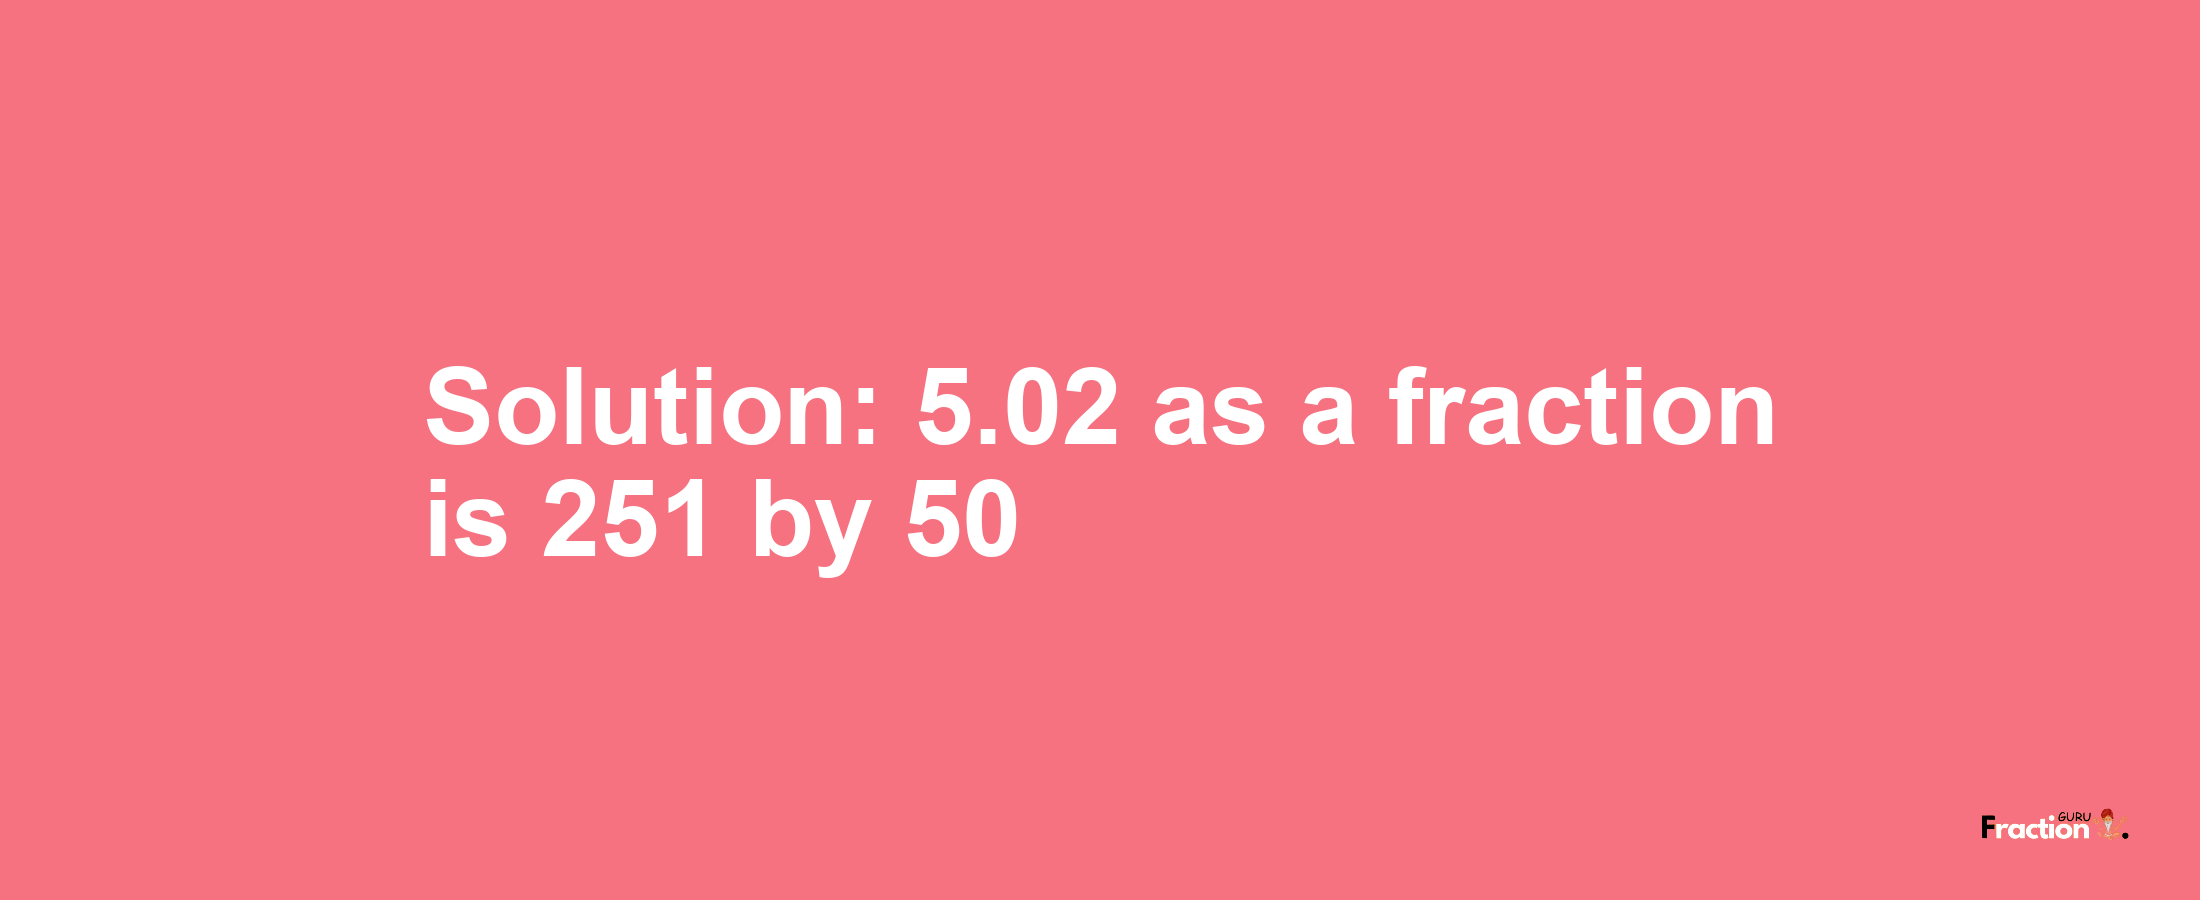 Solution:5.02 as a fraction is 251/50